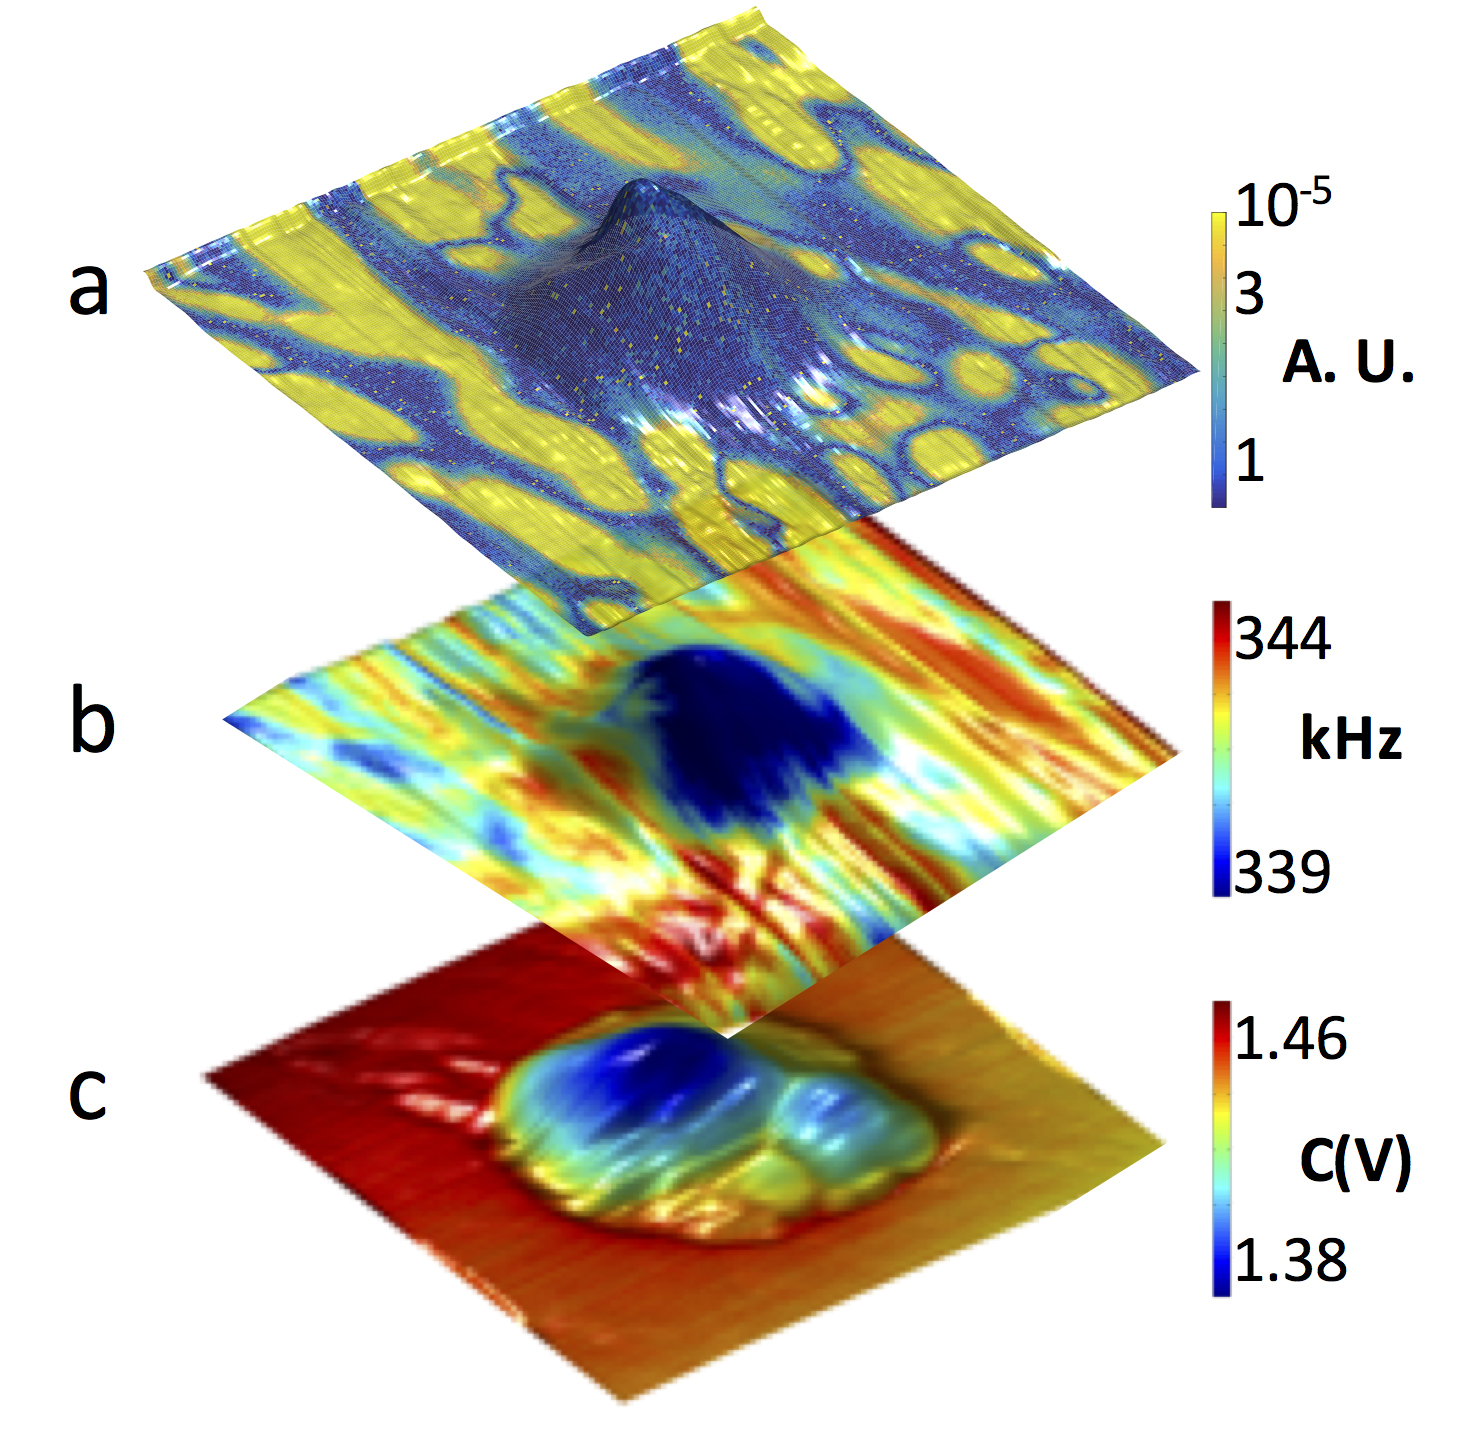  a.) Disappearance domains in the exposed area; as the mound forms yellow regions (ferroelectricity) gradually disappear; b.) Mechanical properties of the material; warmer colors indicate hard areas, cool colors indicate soft areas; c.) Conductivity enhancement; warmer colors show insulating areas, cooler colors show more conductive areas.